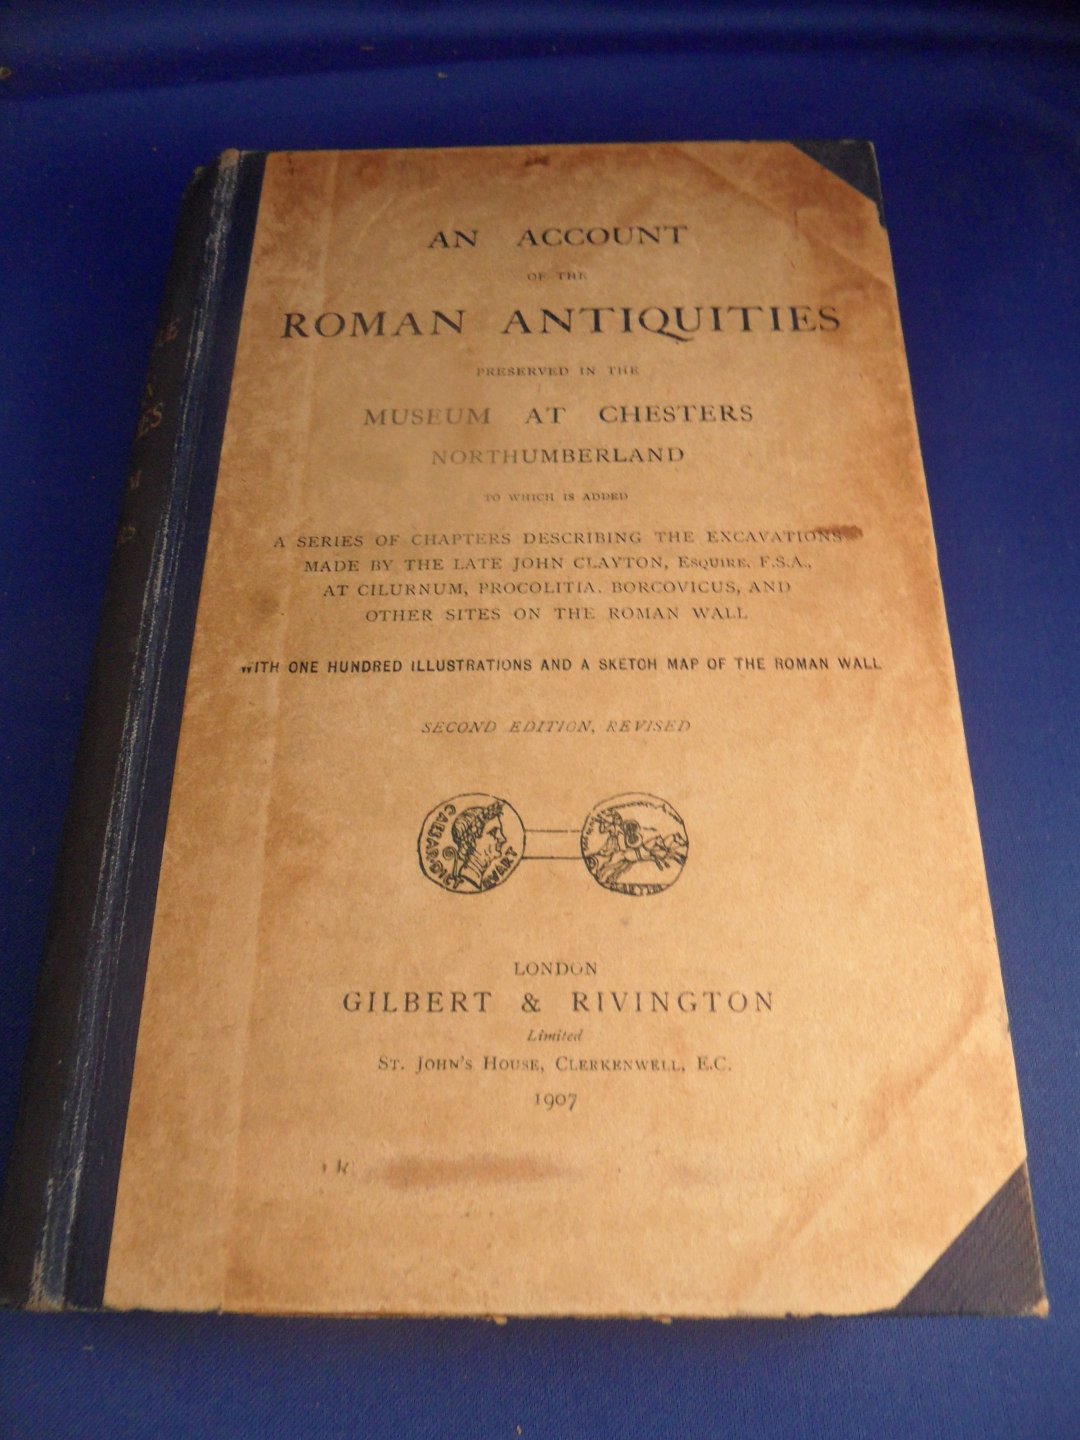 BUDGE, E. A. Wallis (ed.). - An Account of the Roman Antiquities Preserved in the Museum at Chesters Northumberland